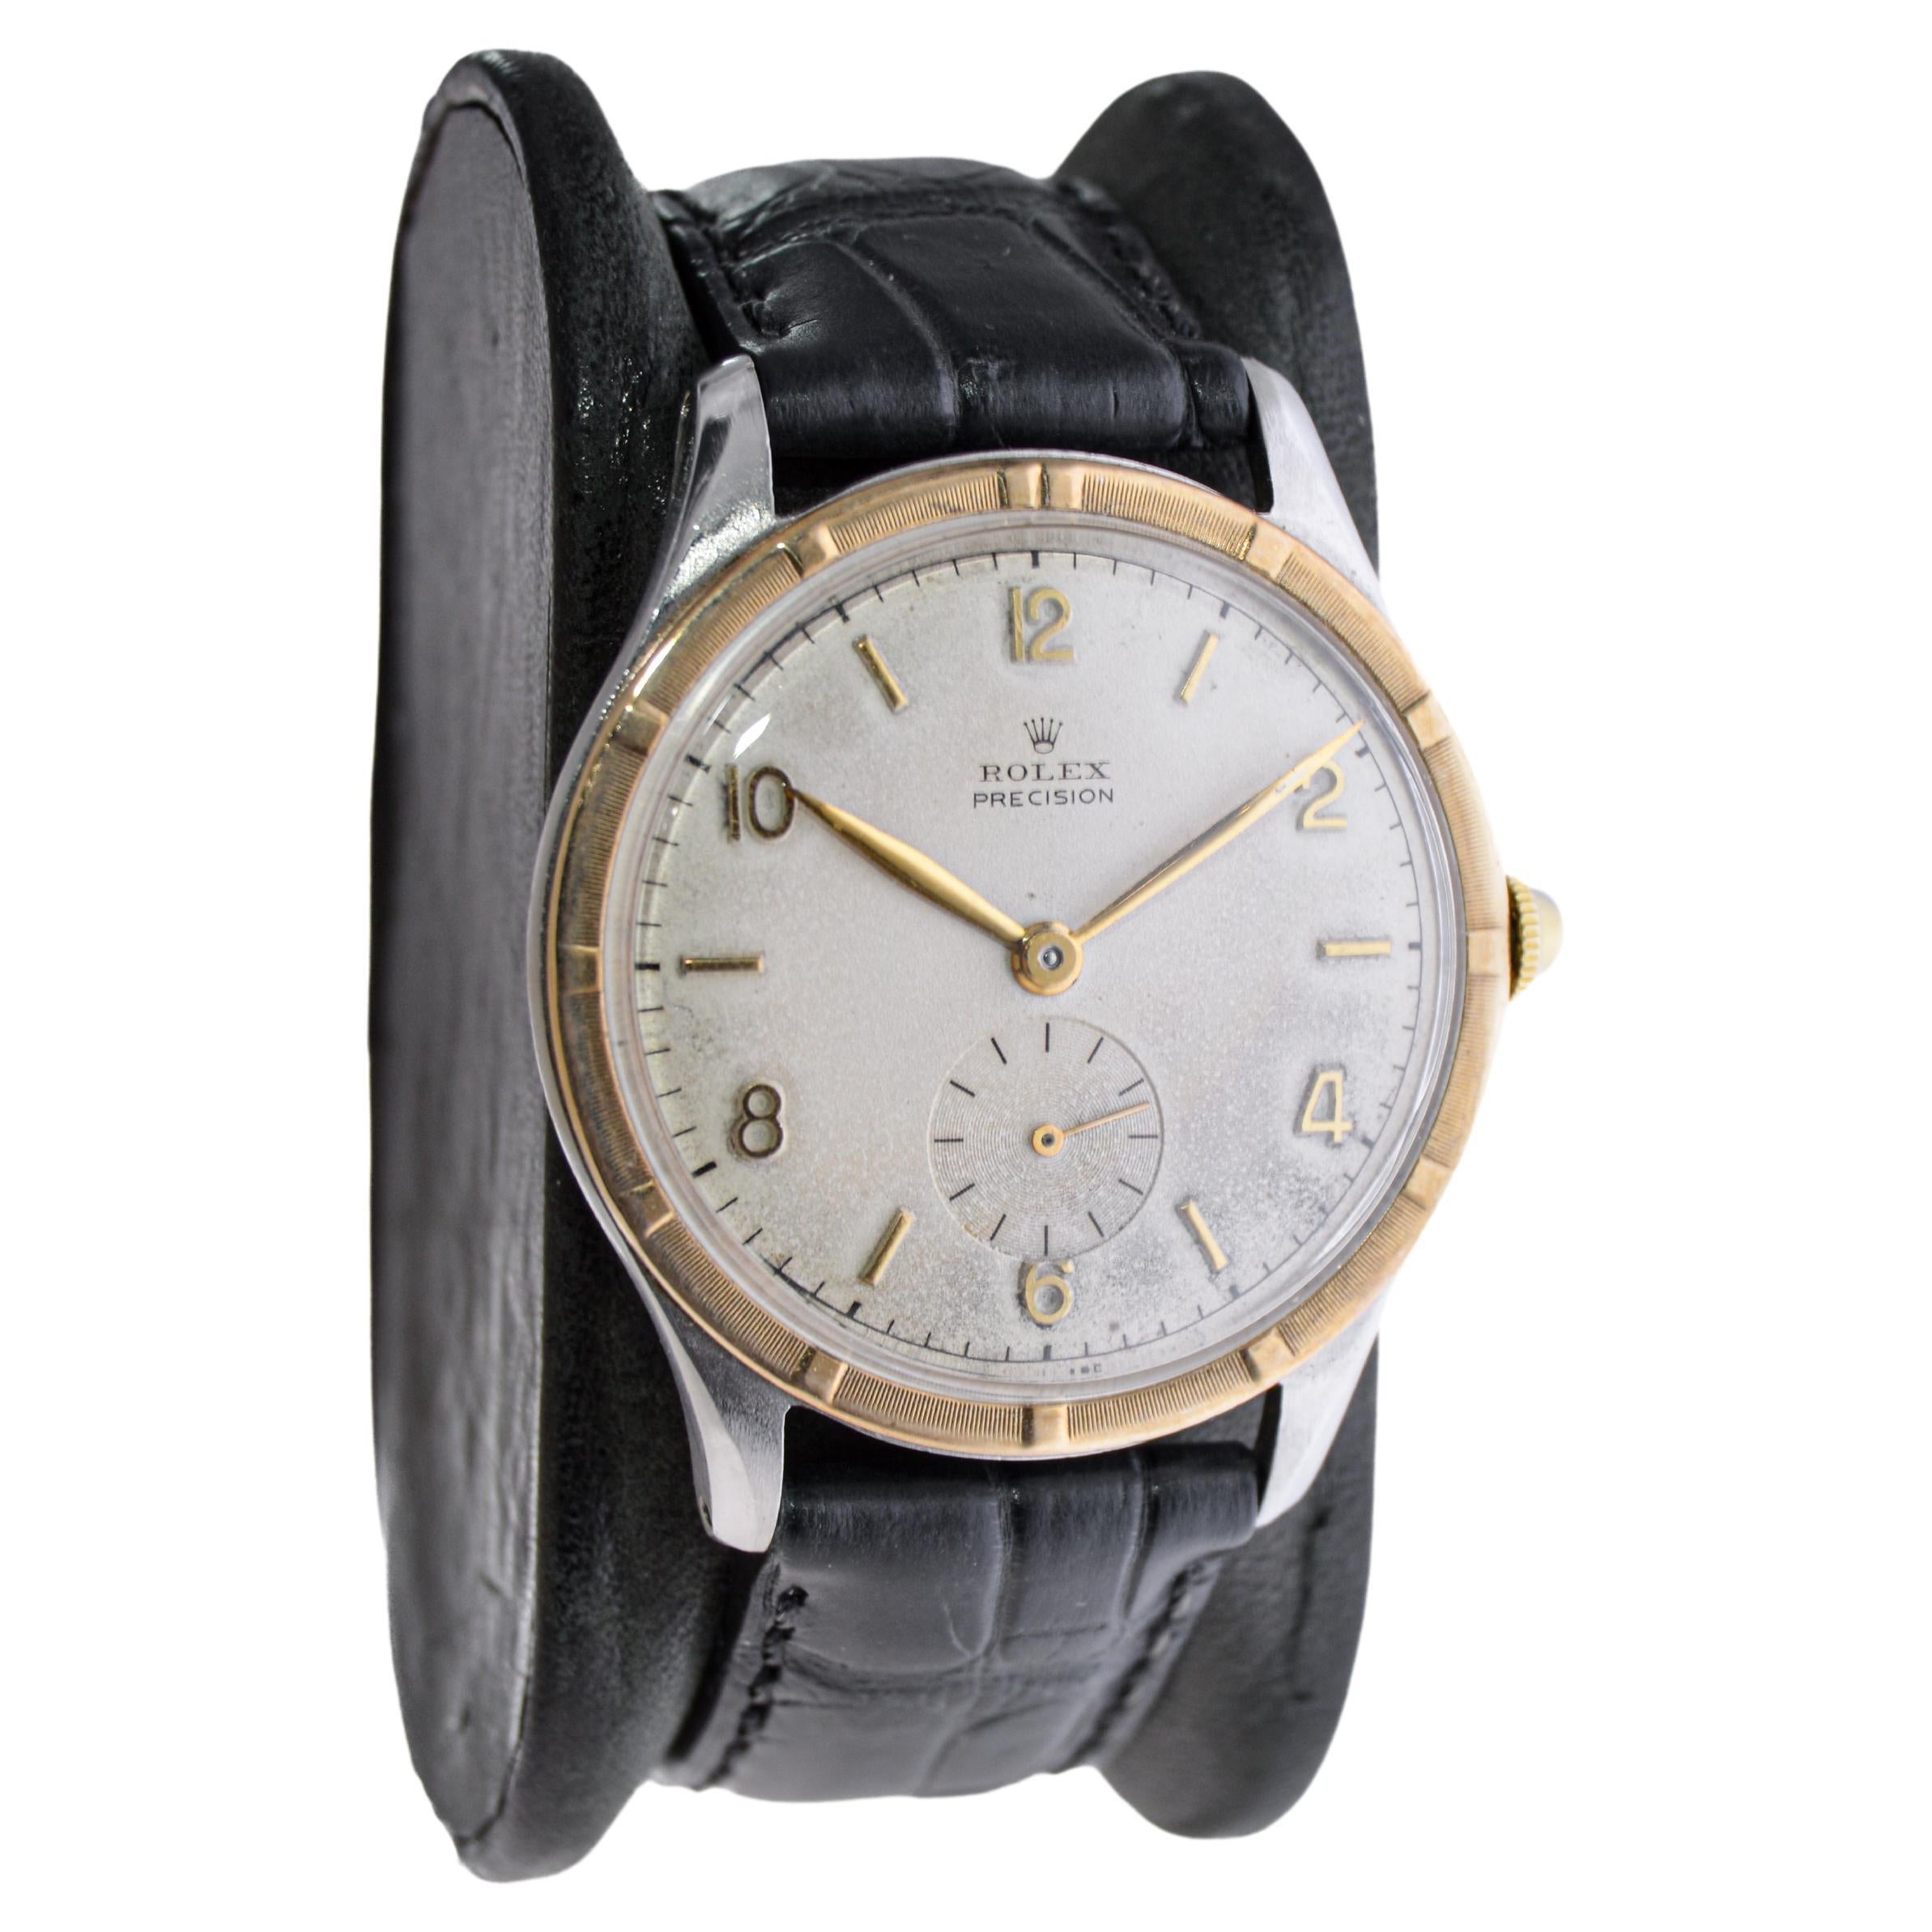 FACTORY / HOUSE: Rolex Watch Company
STYLE / REFERENCE: Oversized Round / Reference 4517
METAL / MATERIAL: Stainless Steel & Gold
CIRCA / YEAR: 1953
DIMENSIONS / SIZE: 42mm Length X 35mm Diameter
MOVEMENT / CALIBER: Manual Winding / 17 Jewels 
/ 